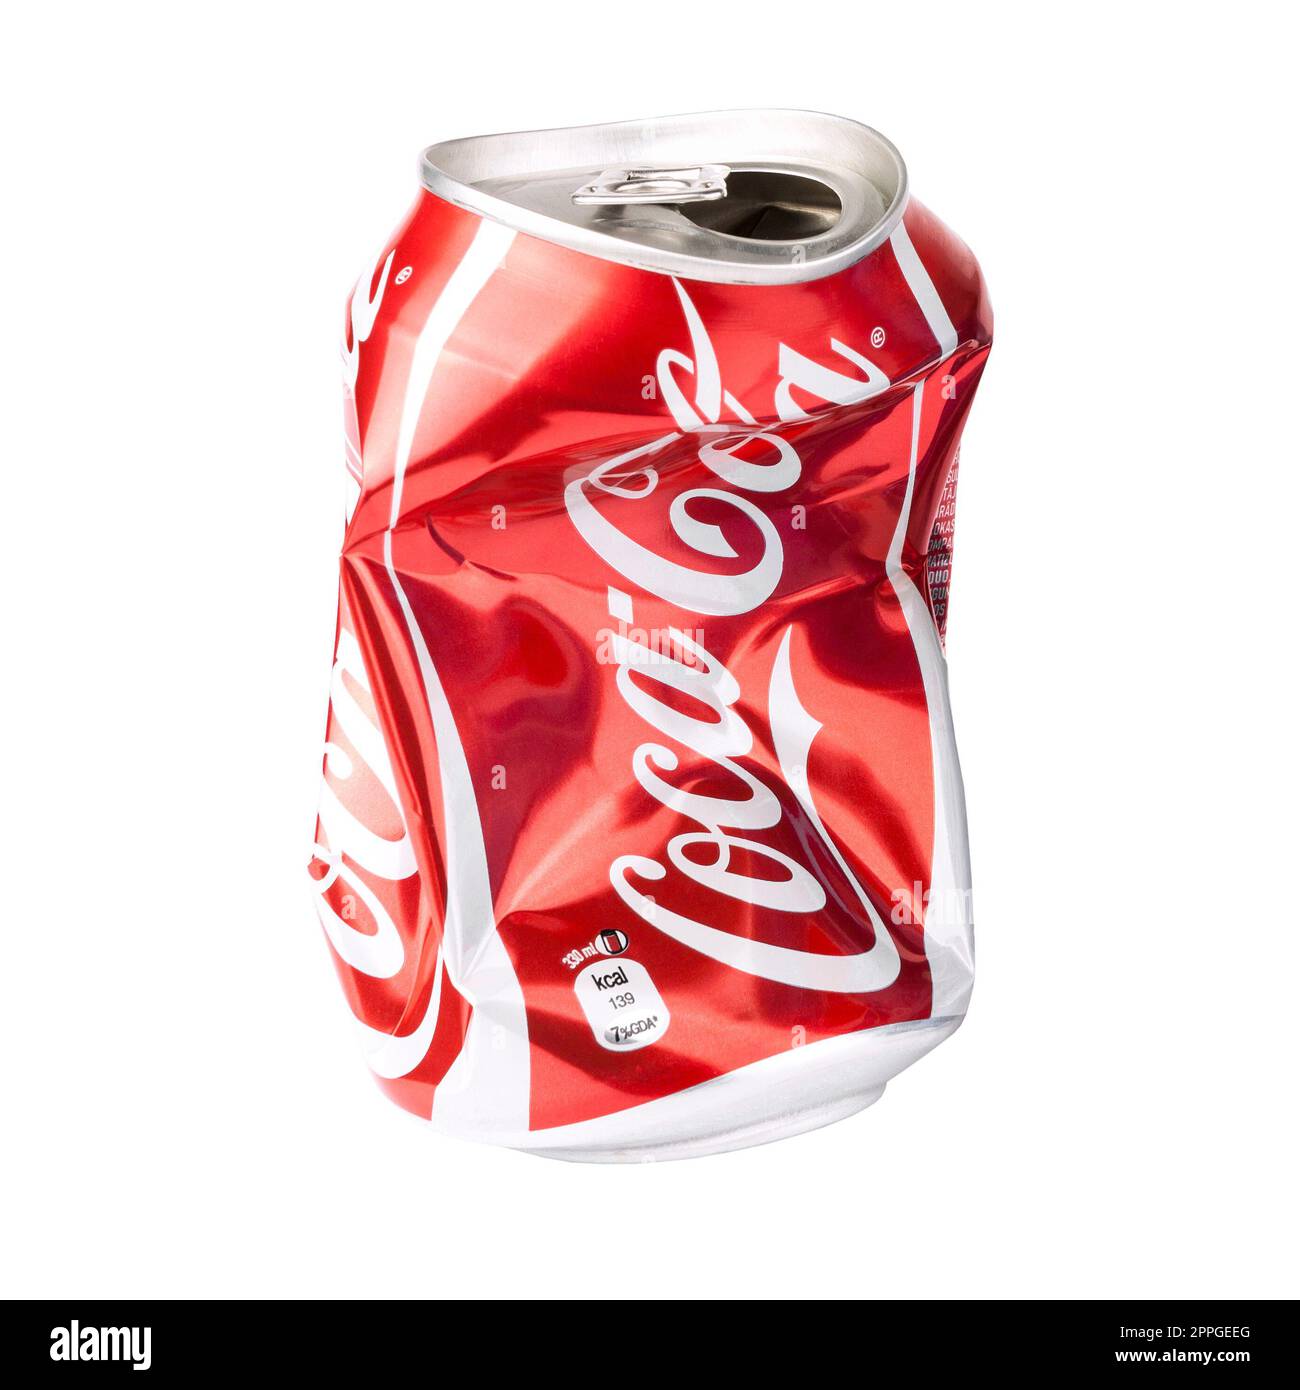 Crushed Coca Cola can isolated Stock Photo